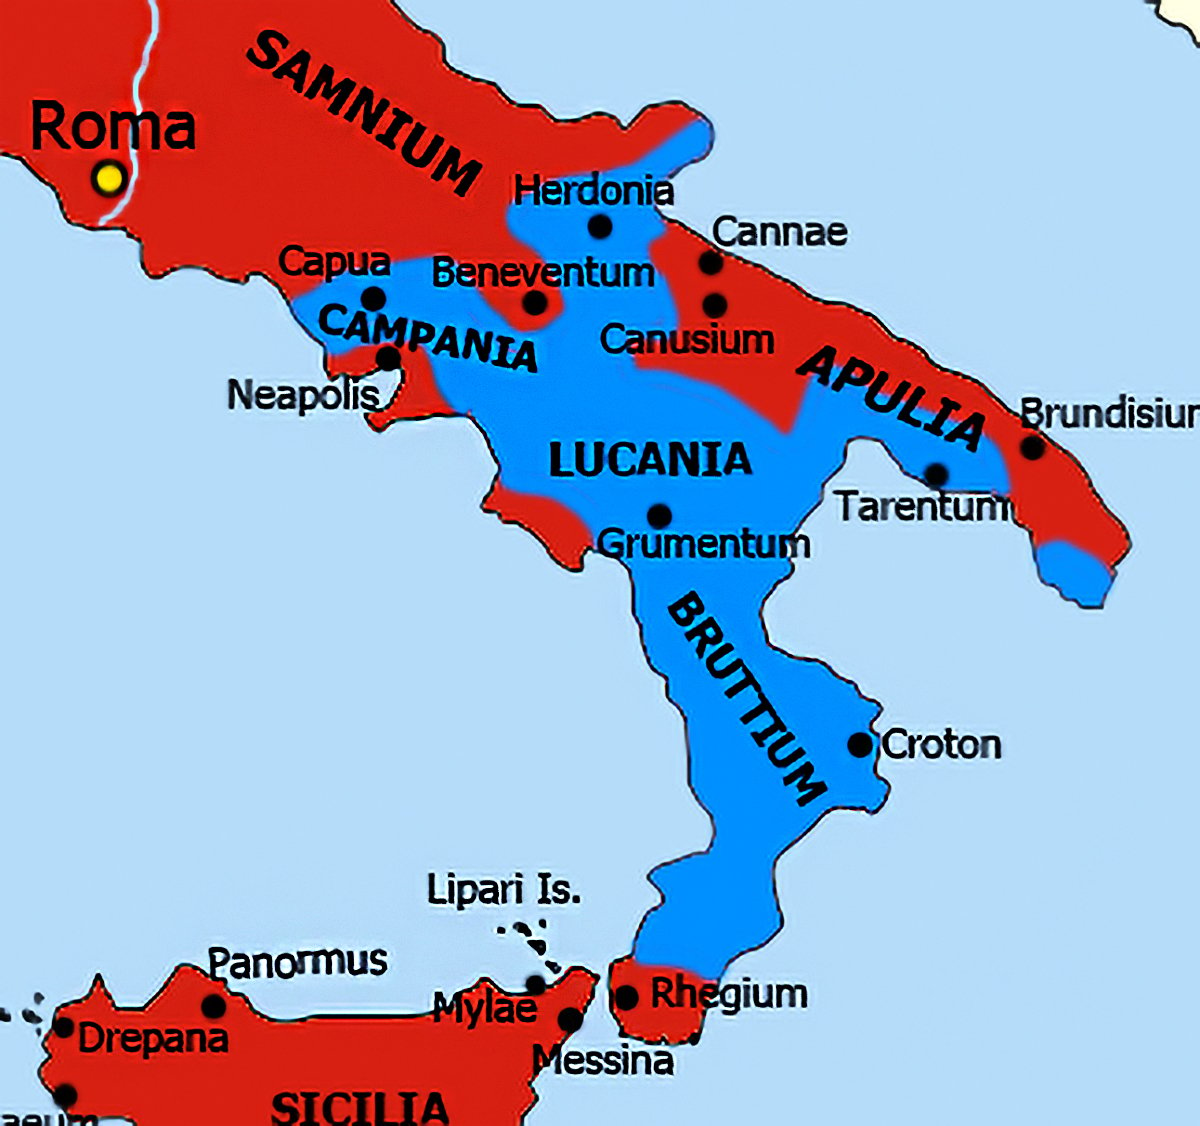 A map highlighting in blue the regions of Southern Italy allied with Hannibal, juxtaposed with Roman territory in red, featuring key locations and battles during the Second Punic War.